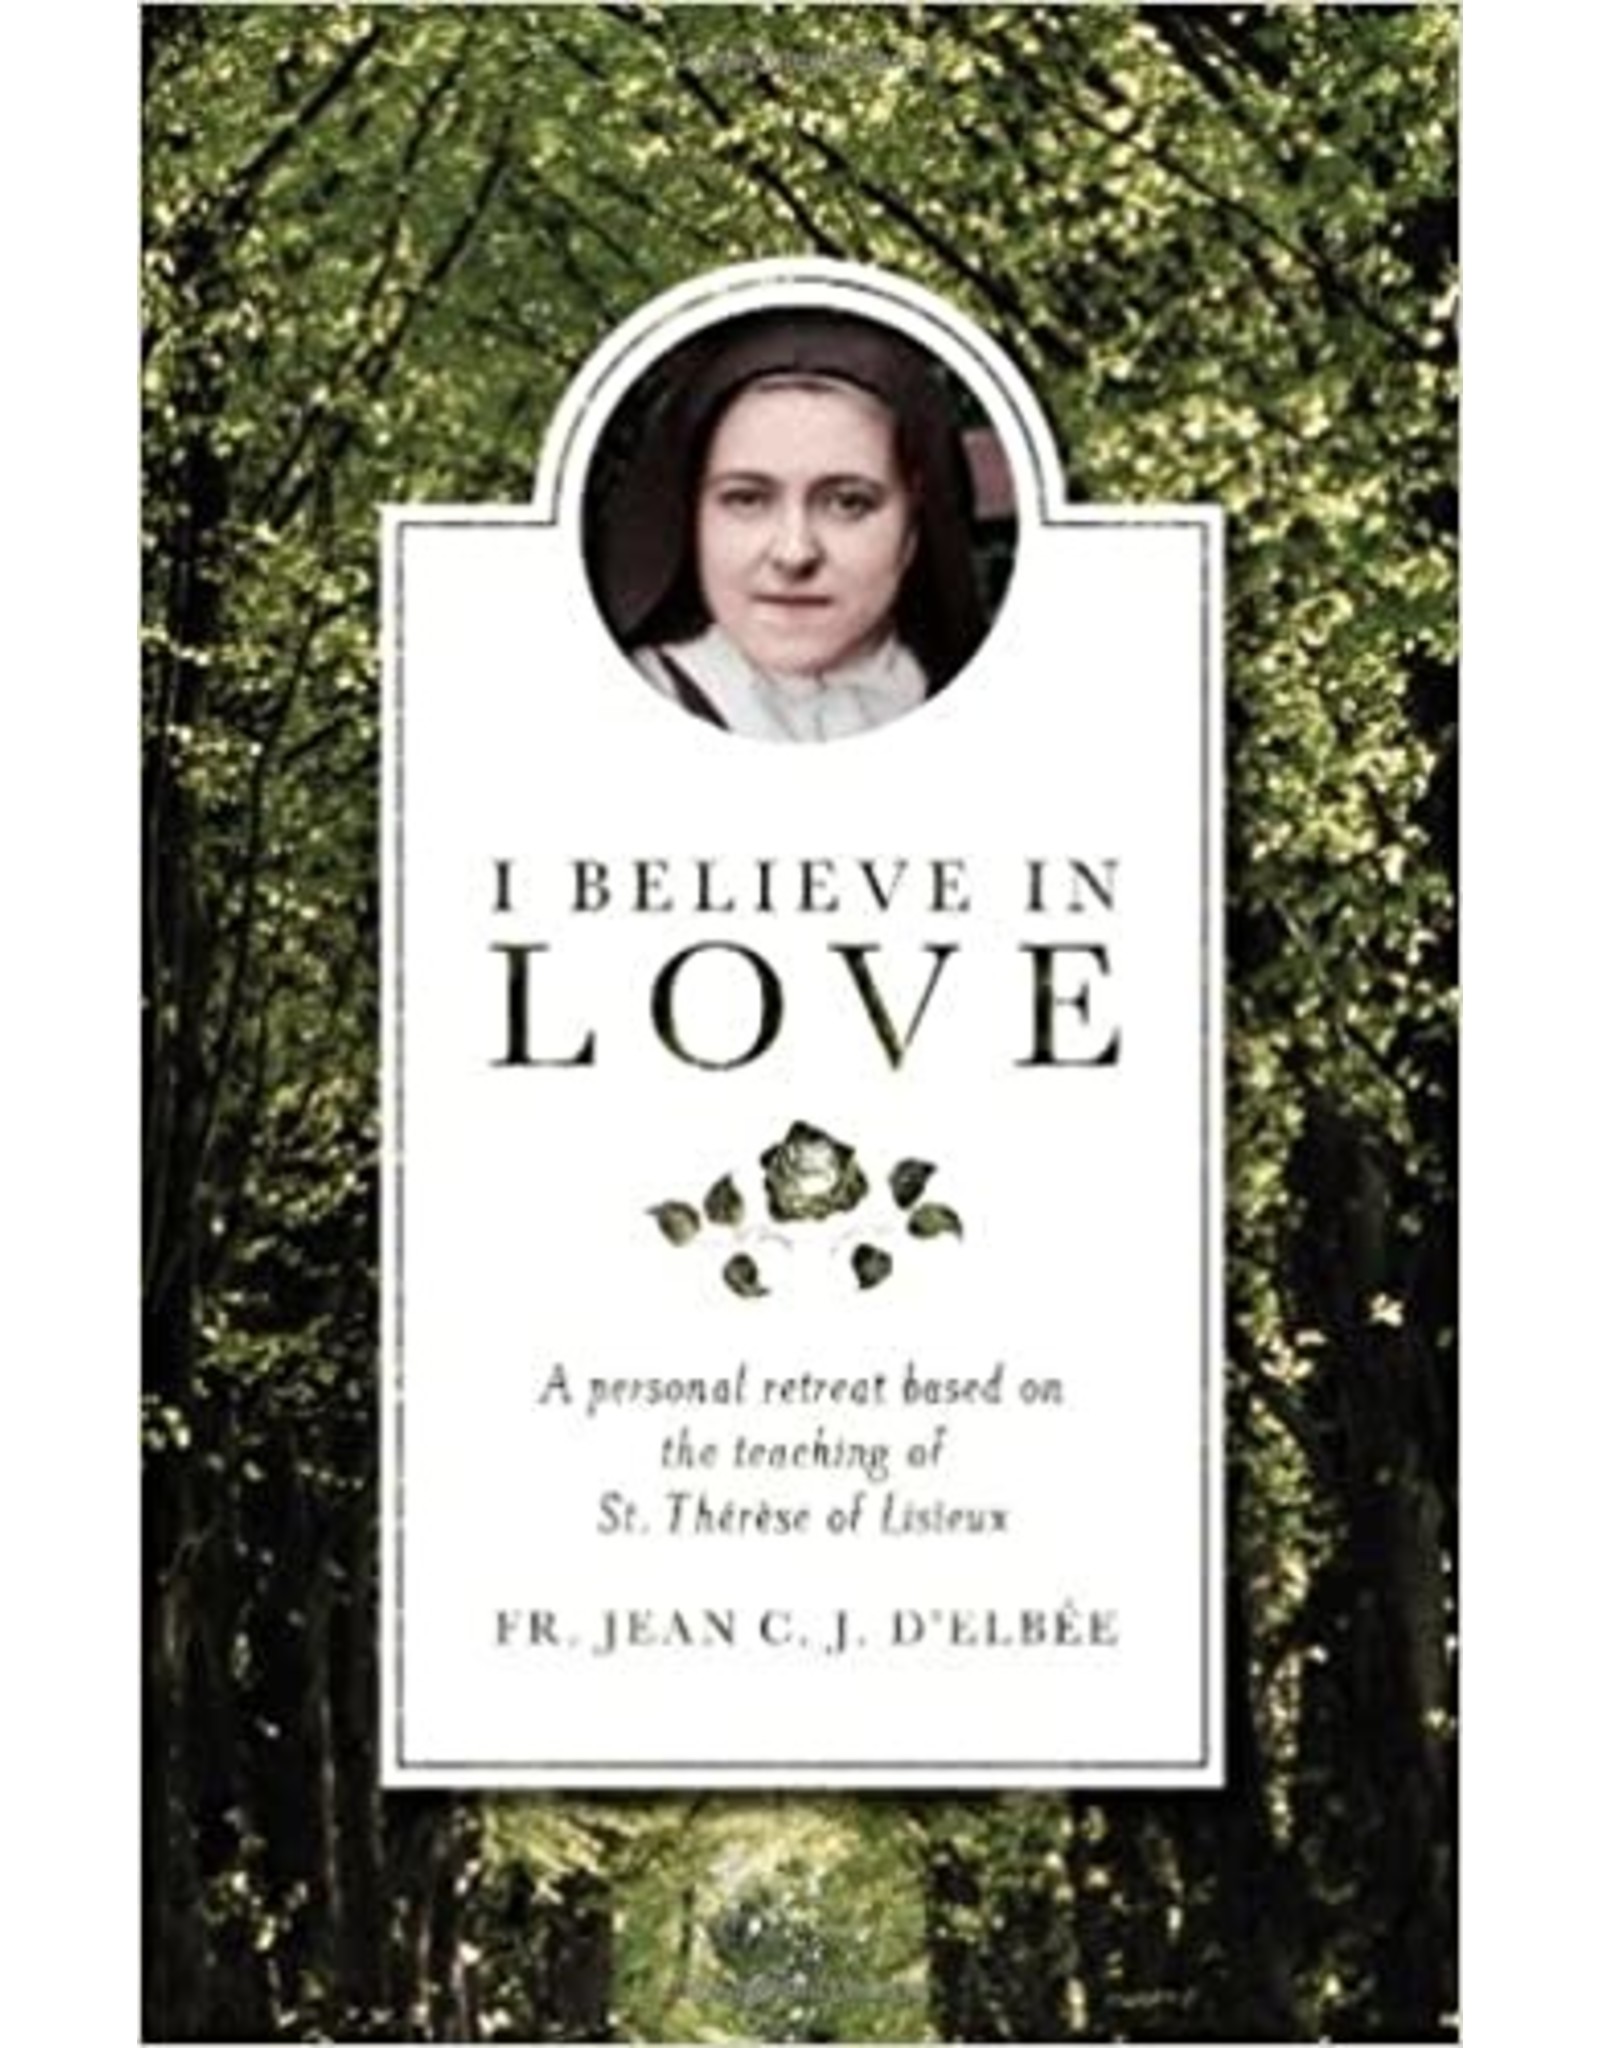 Sophia Press I Believe in Love: A Personal Retreat Based on the Teaching of St. Therese of Lisieux by Fr. Jean C.J. D'Elbee (Paperback)